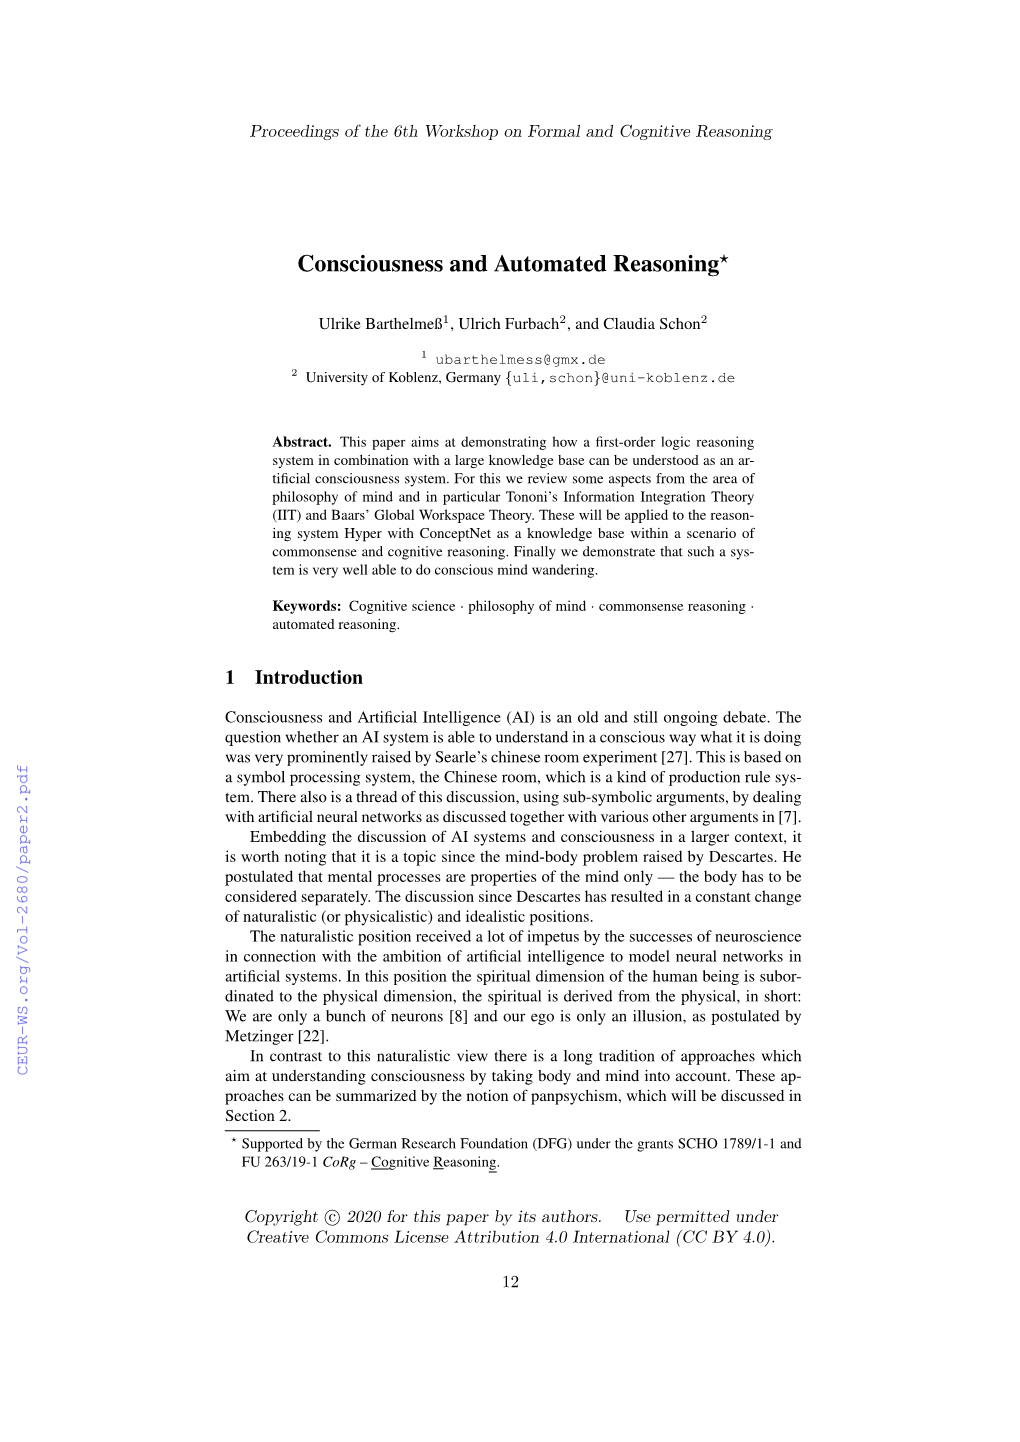 Consciousness and Automated Reasoning?